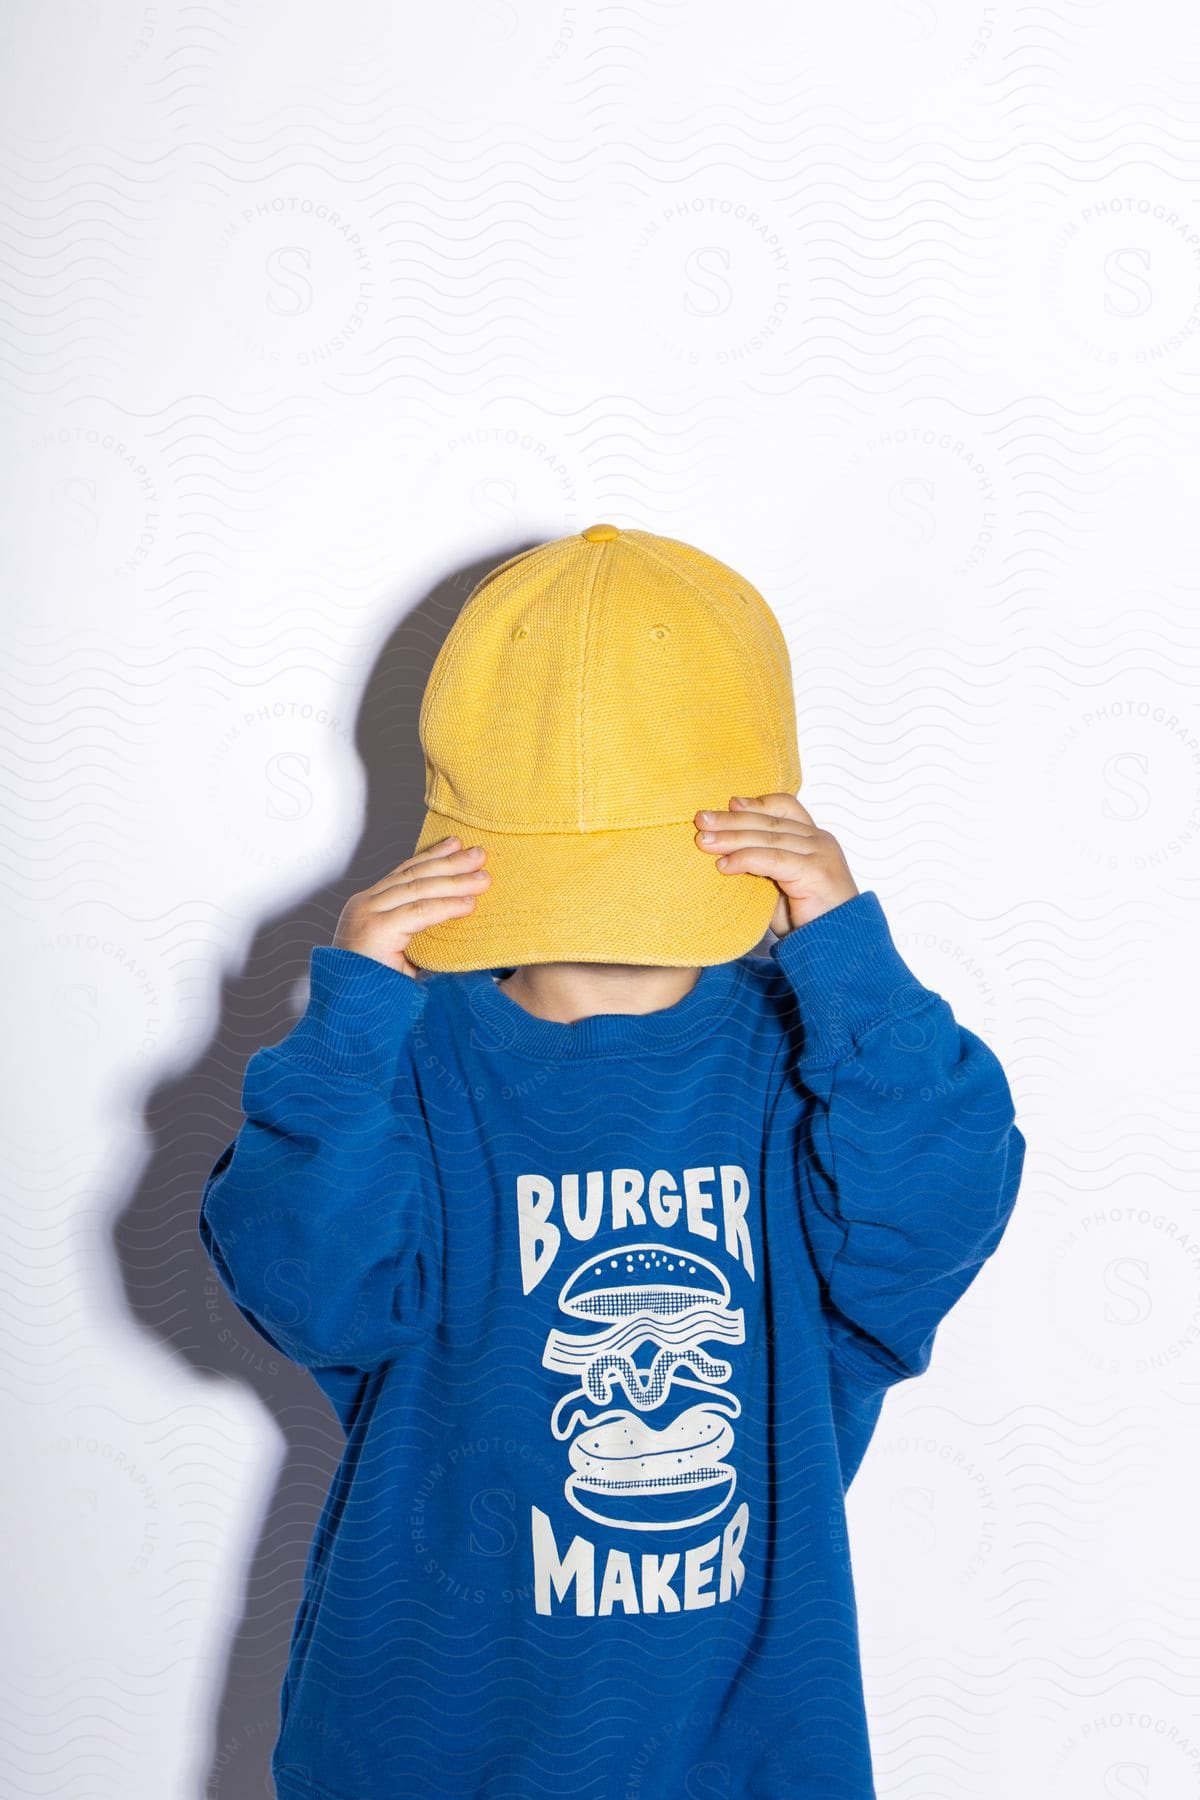 A boy wearing a yellow cap covering his face and a blue hoodie with the words "burger maker" written on it.